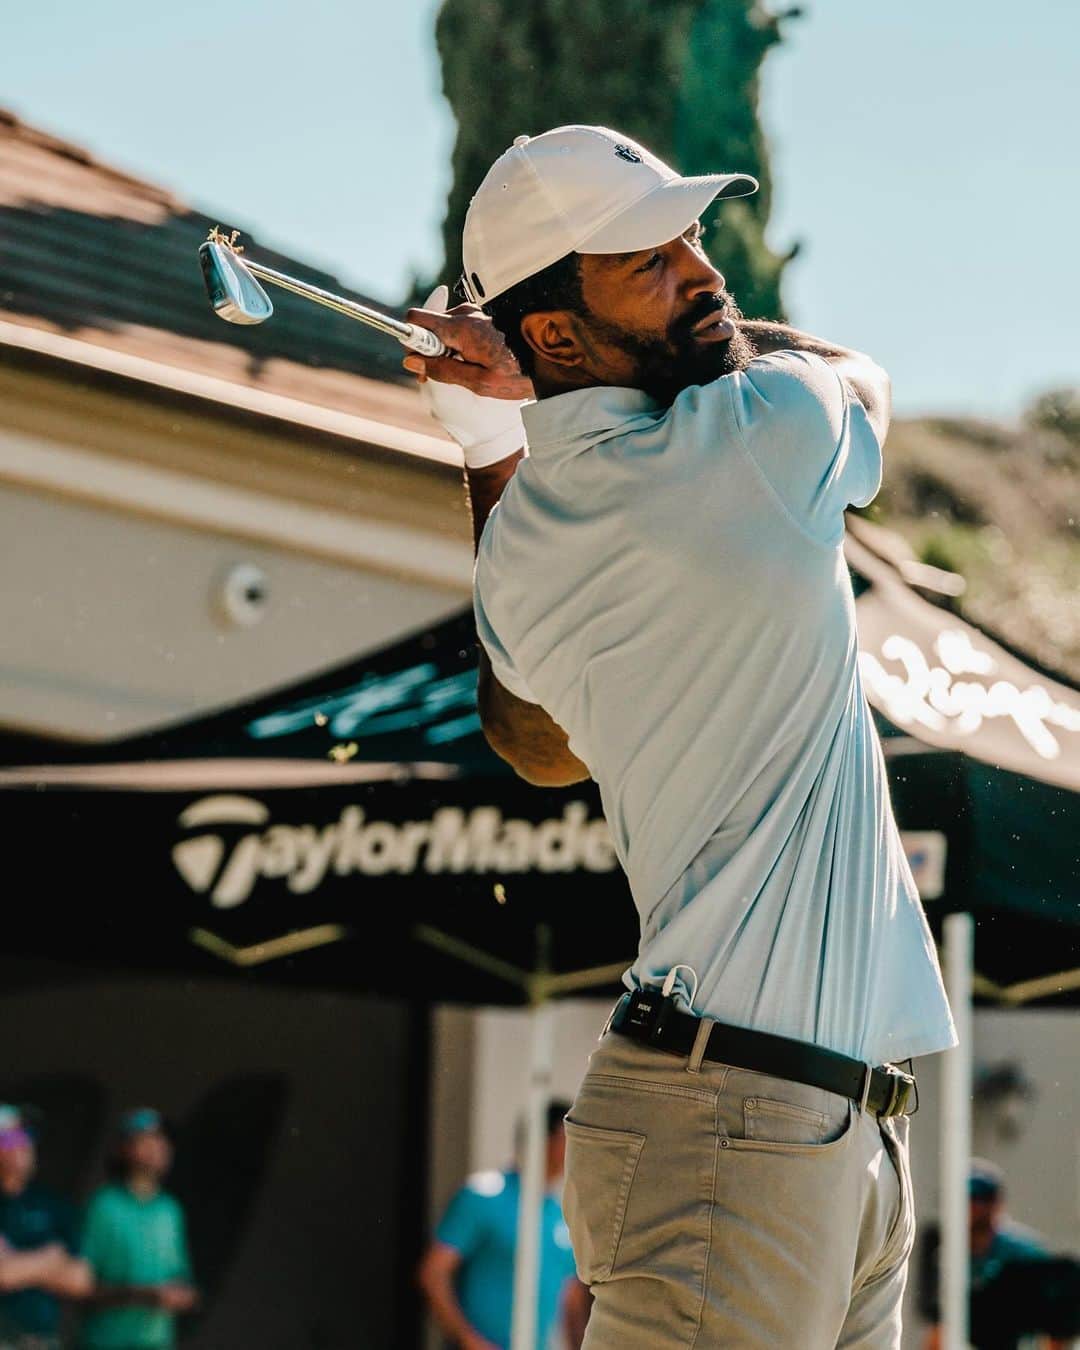 J・R・スミスのインスタグラム：「Starting this game late opened my eyes to a lot of things. Now, I'm teaming with @taylormadegolf for the 100 Hole Hike, backing @yocgolf. They're changing kids' lives through golf, offering more than just a game – they're giving opportunities, mentors and a future.   So hit that link in my bio, drop a dime, and let's show these kids what we're made of! 💪🏾⛳️ #GolfLife #GameChanger #YouthOnCourse #100HoleHike #TeamTaylorMade 🏌🏾‍♂️✊🏾」